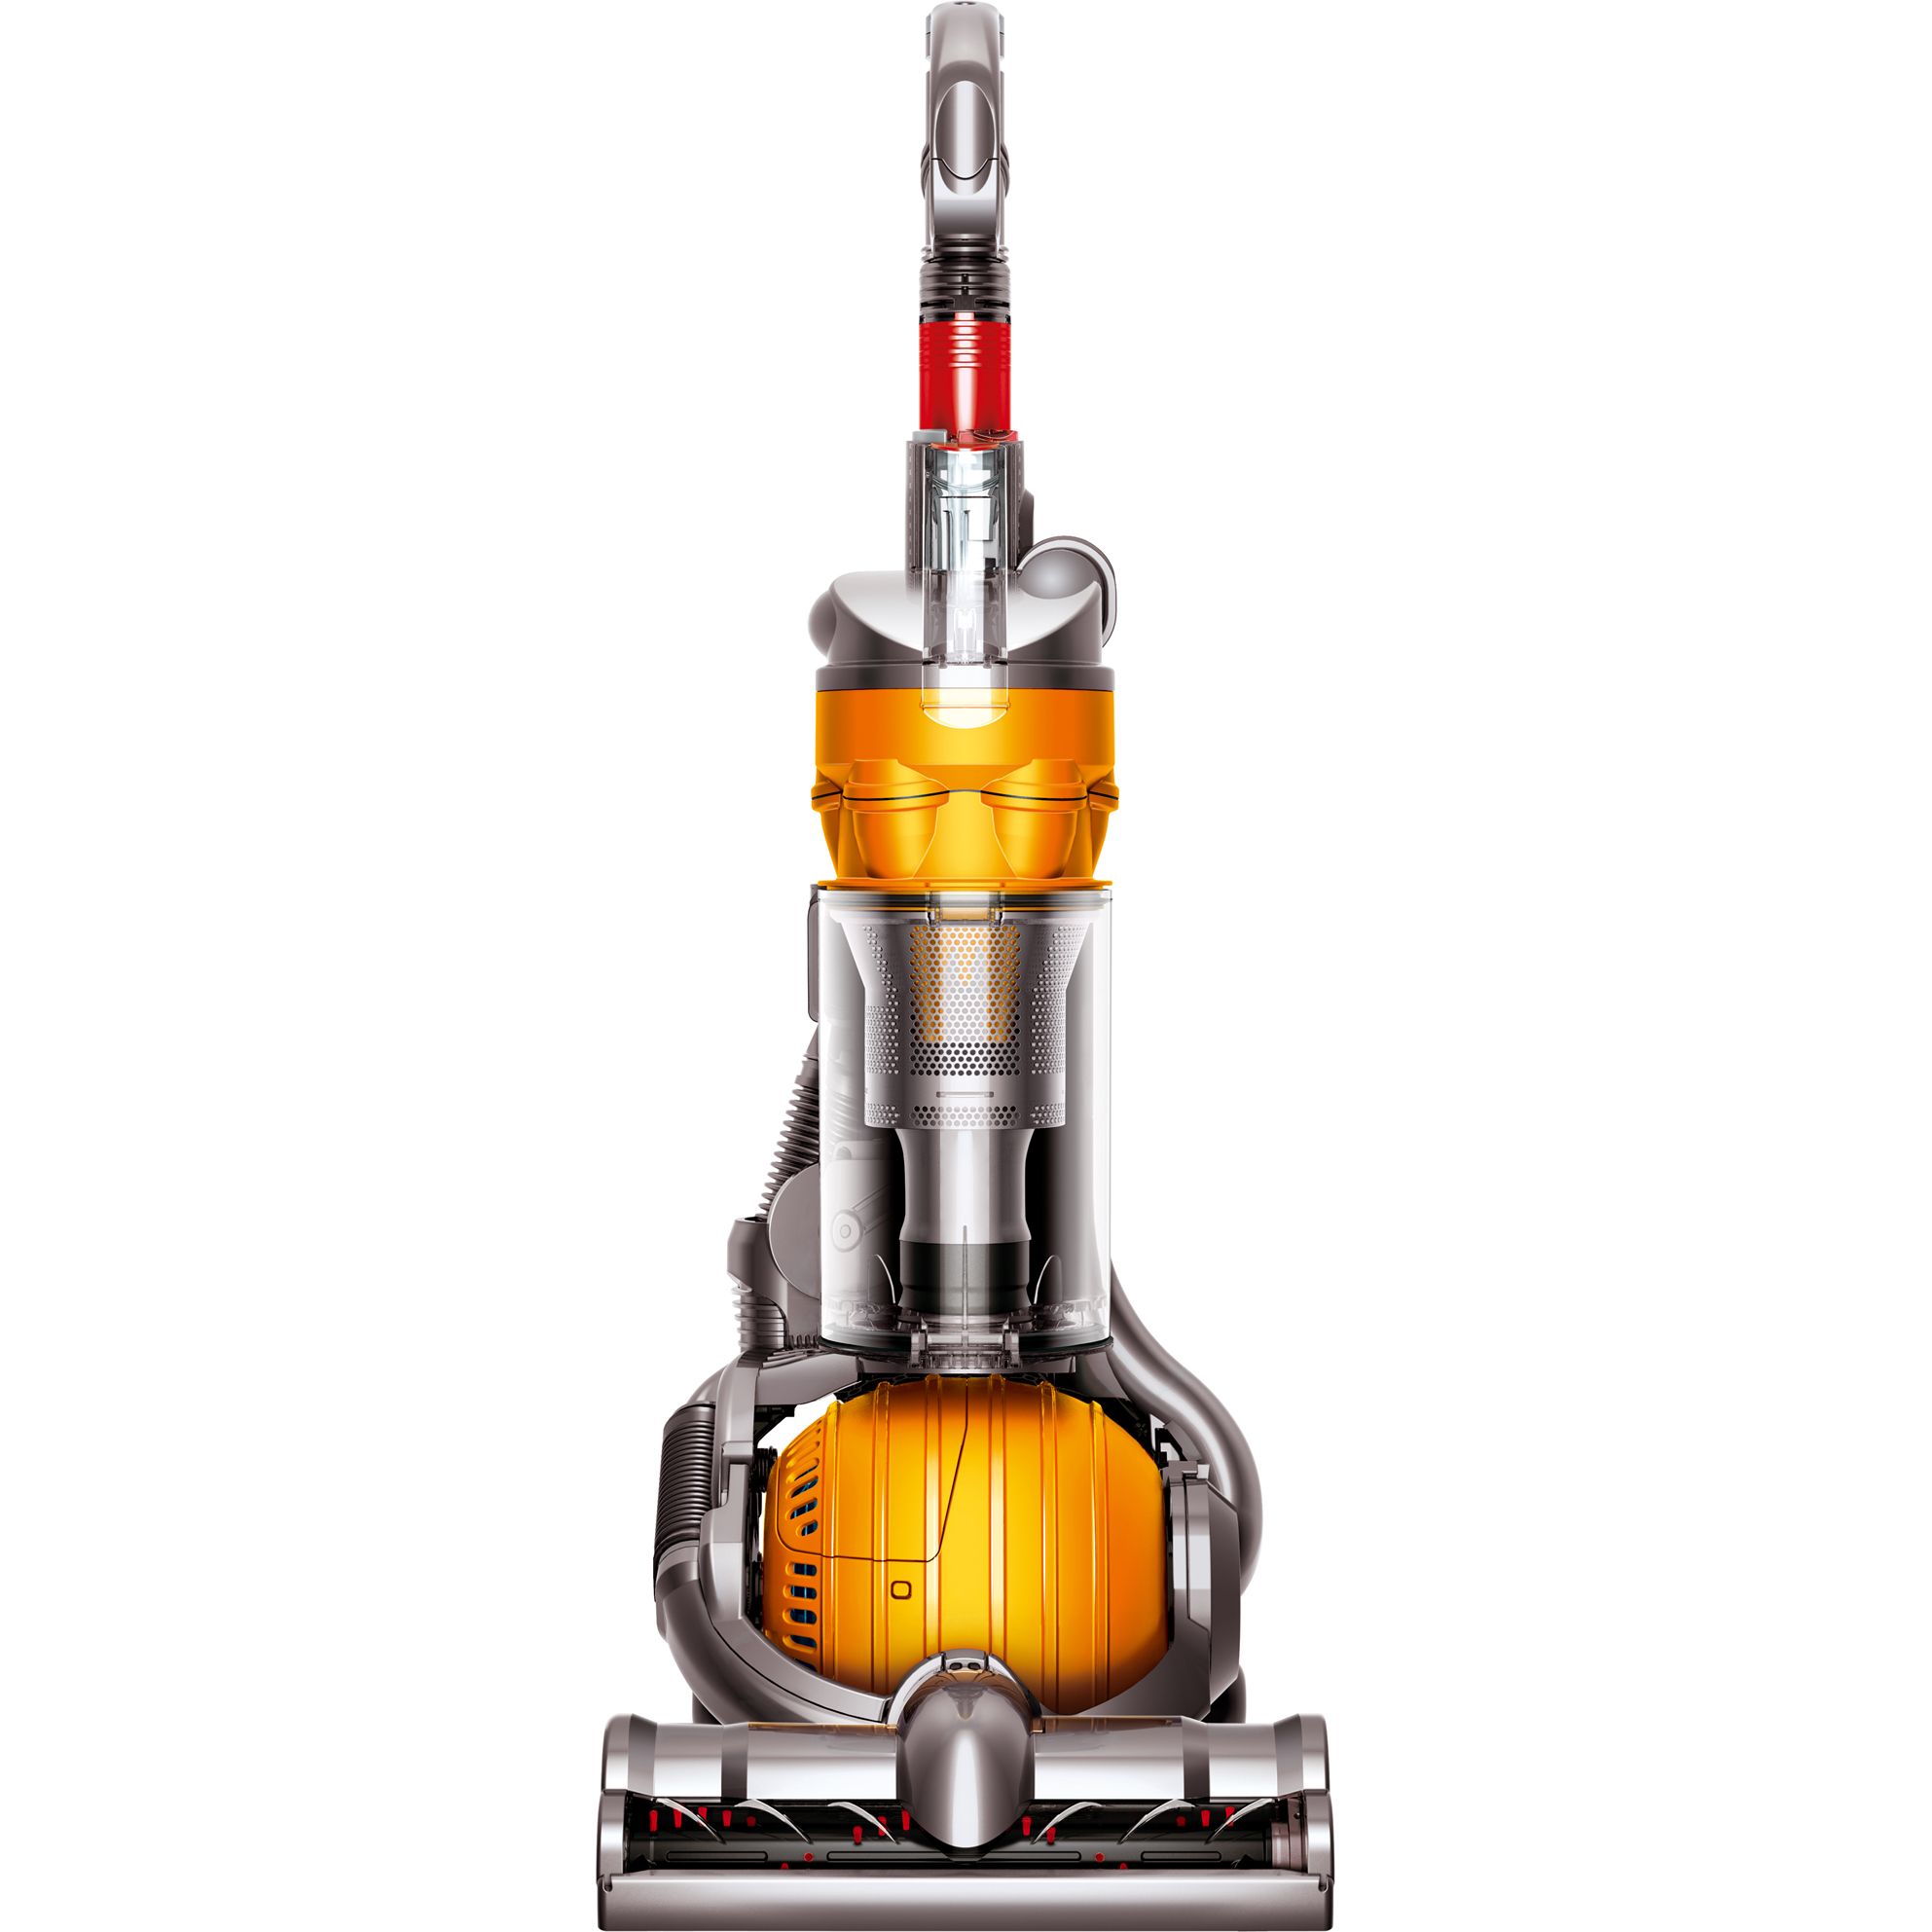 UPC 879957001589 product image for Dyson DC24 Multi Floor Ultra Lightweight Ball Bagless Upright Vacuum Cleaner - D | upcitemdb.com